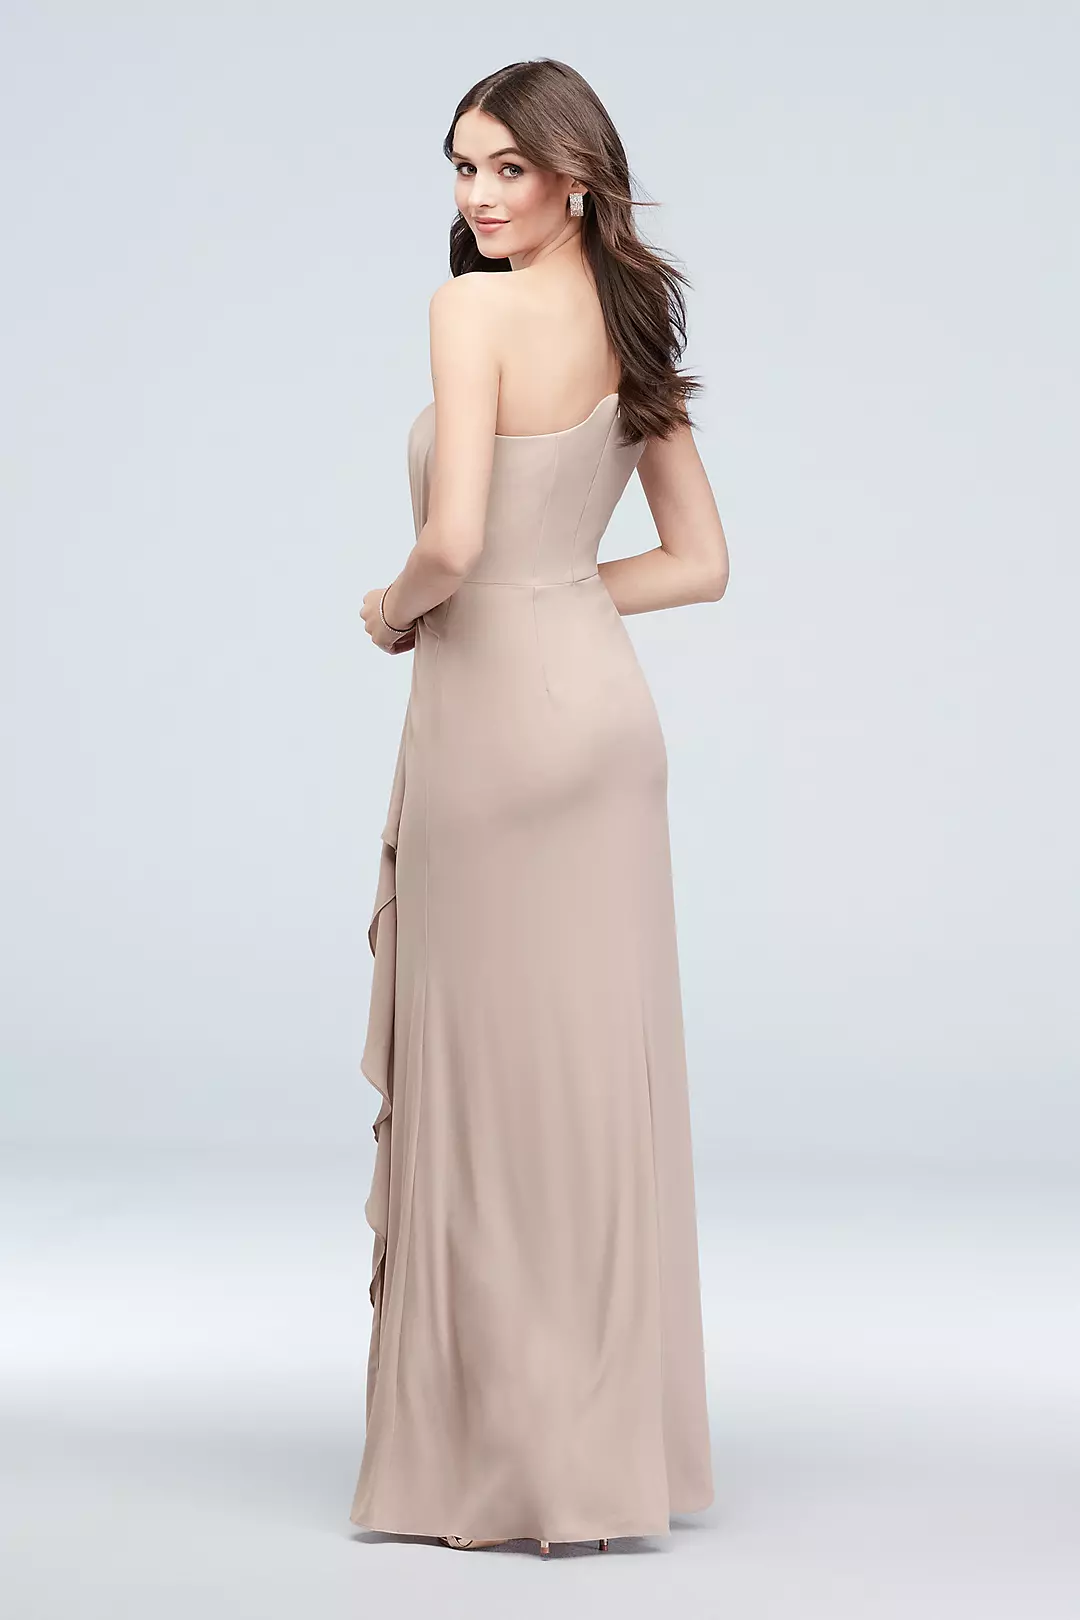 Twisted Knot Cascade One Shoulder Bridesmaid Dress Image 3